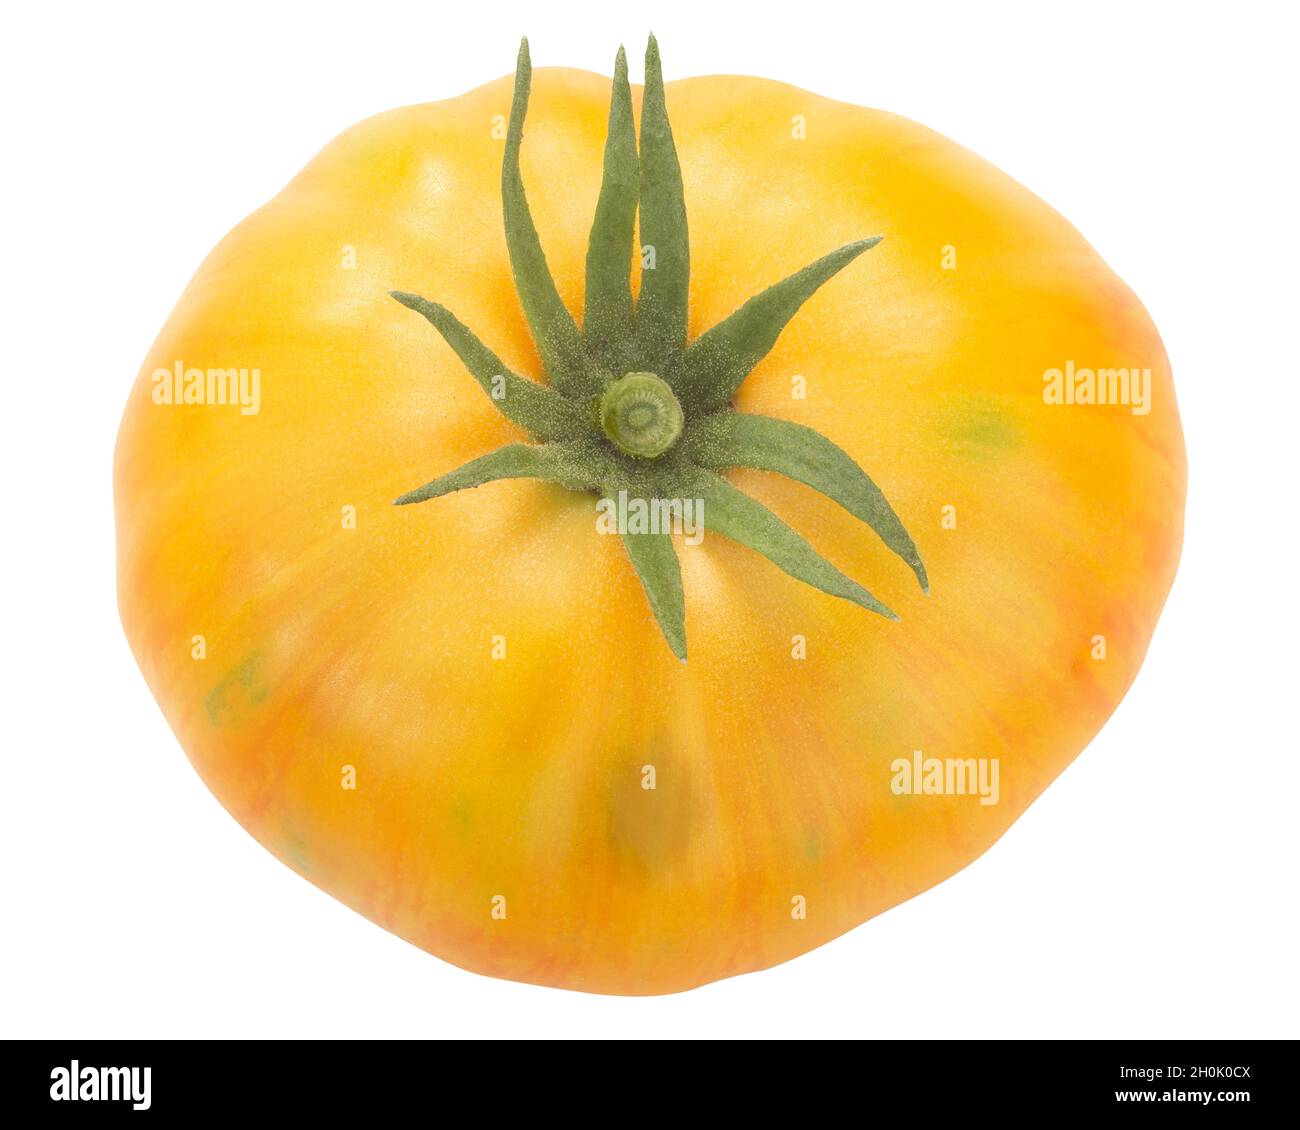 Marzipan Gold heirloom tomato, yellow w red streaks (Solanum lycopersicum fruit), isolated, top view Stock Photo